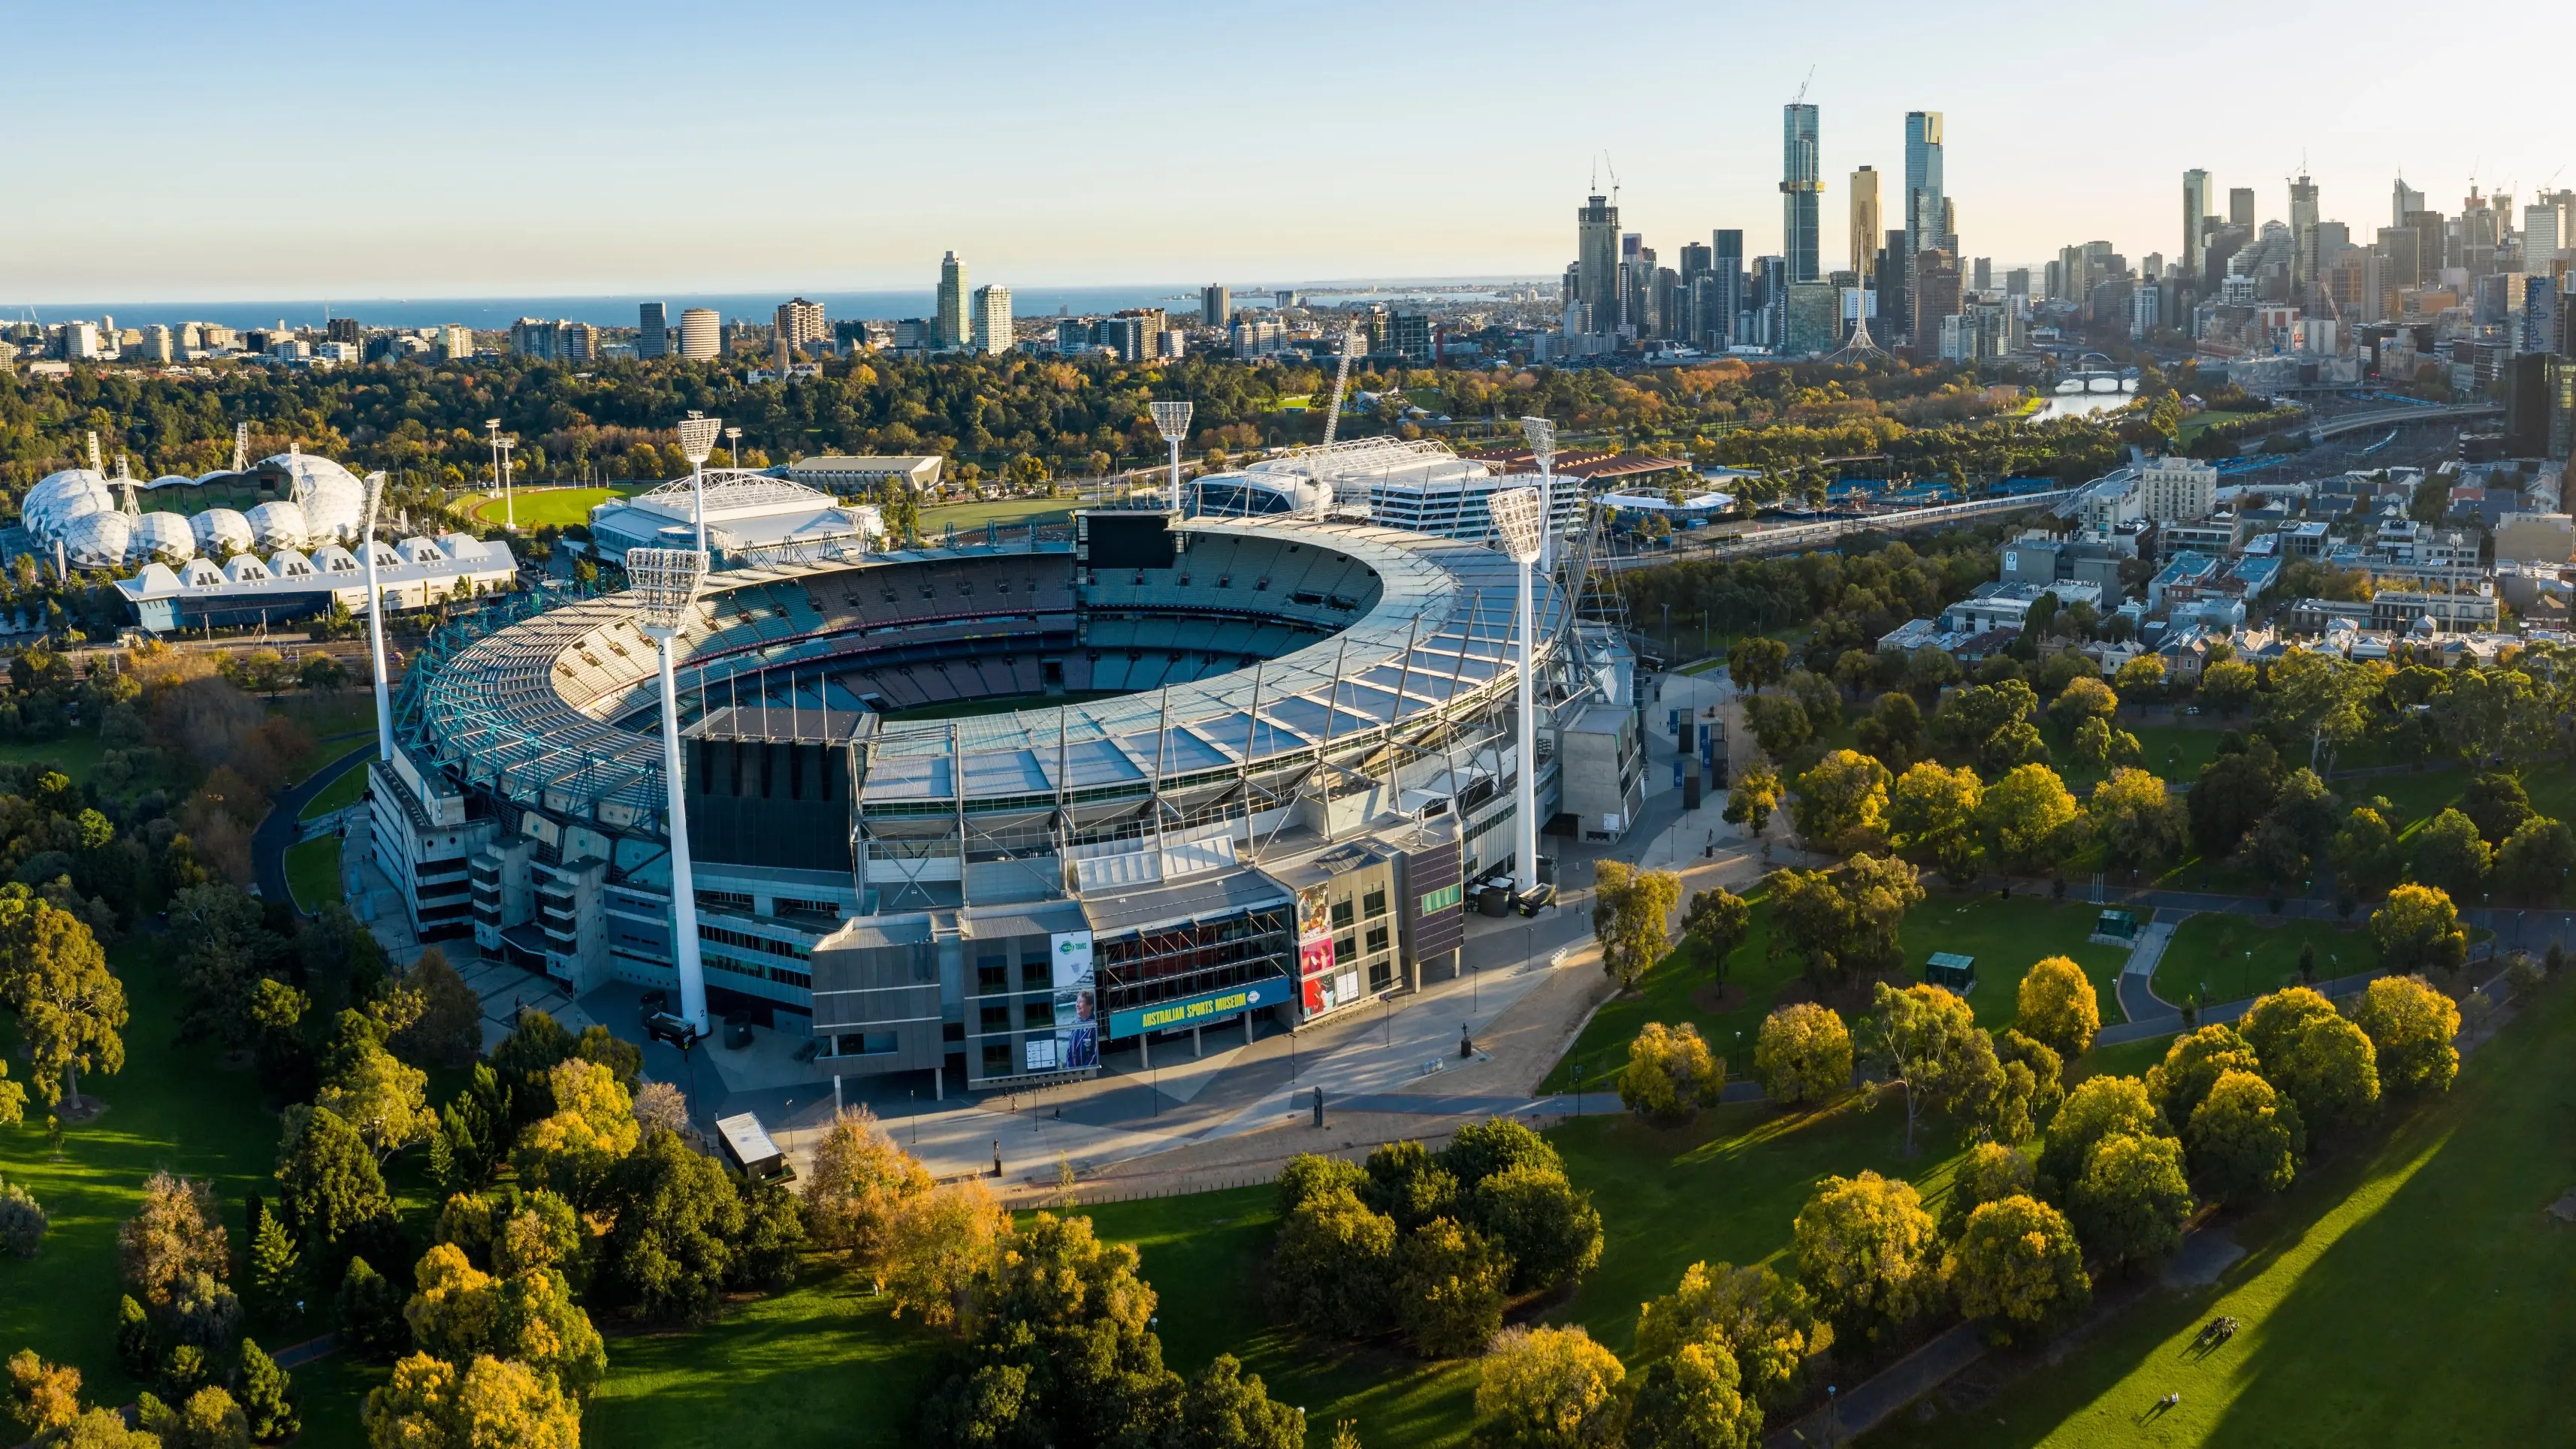 Aerial view of Melbourne Cricket Ground on a sunny day, surrounded by trees with the city skyline in the background. Image credit: Michael Evans/stock.adobe.com